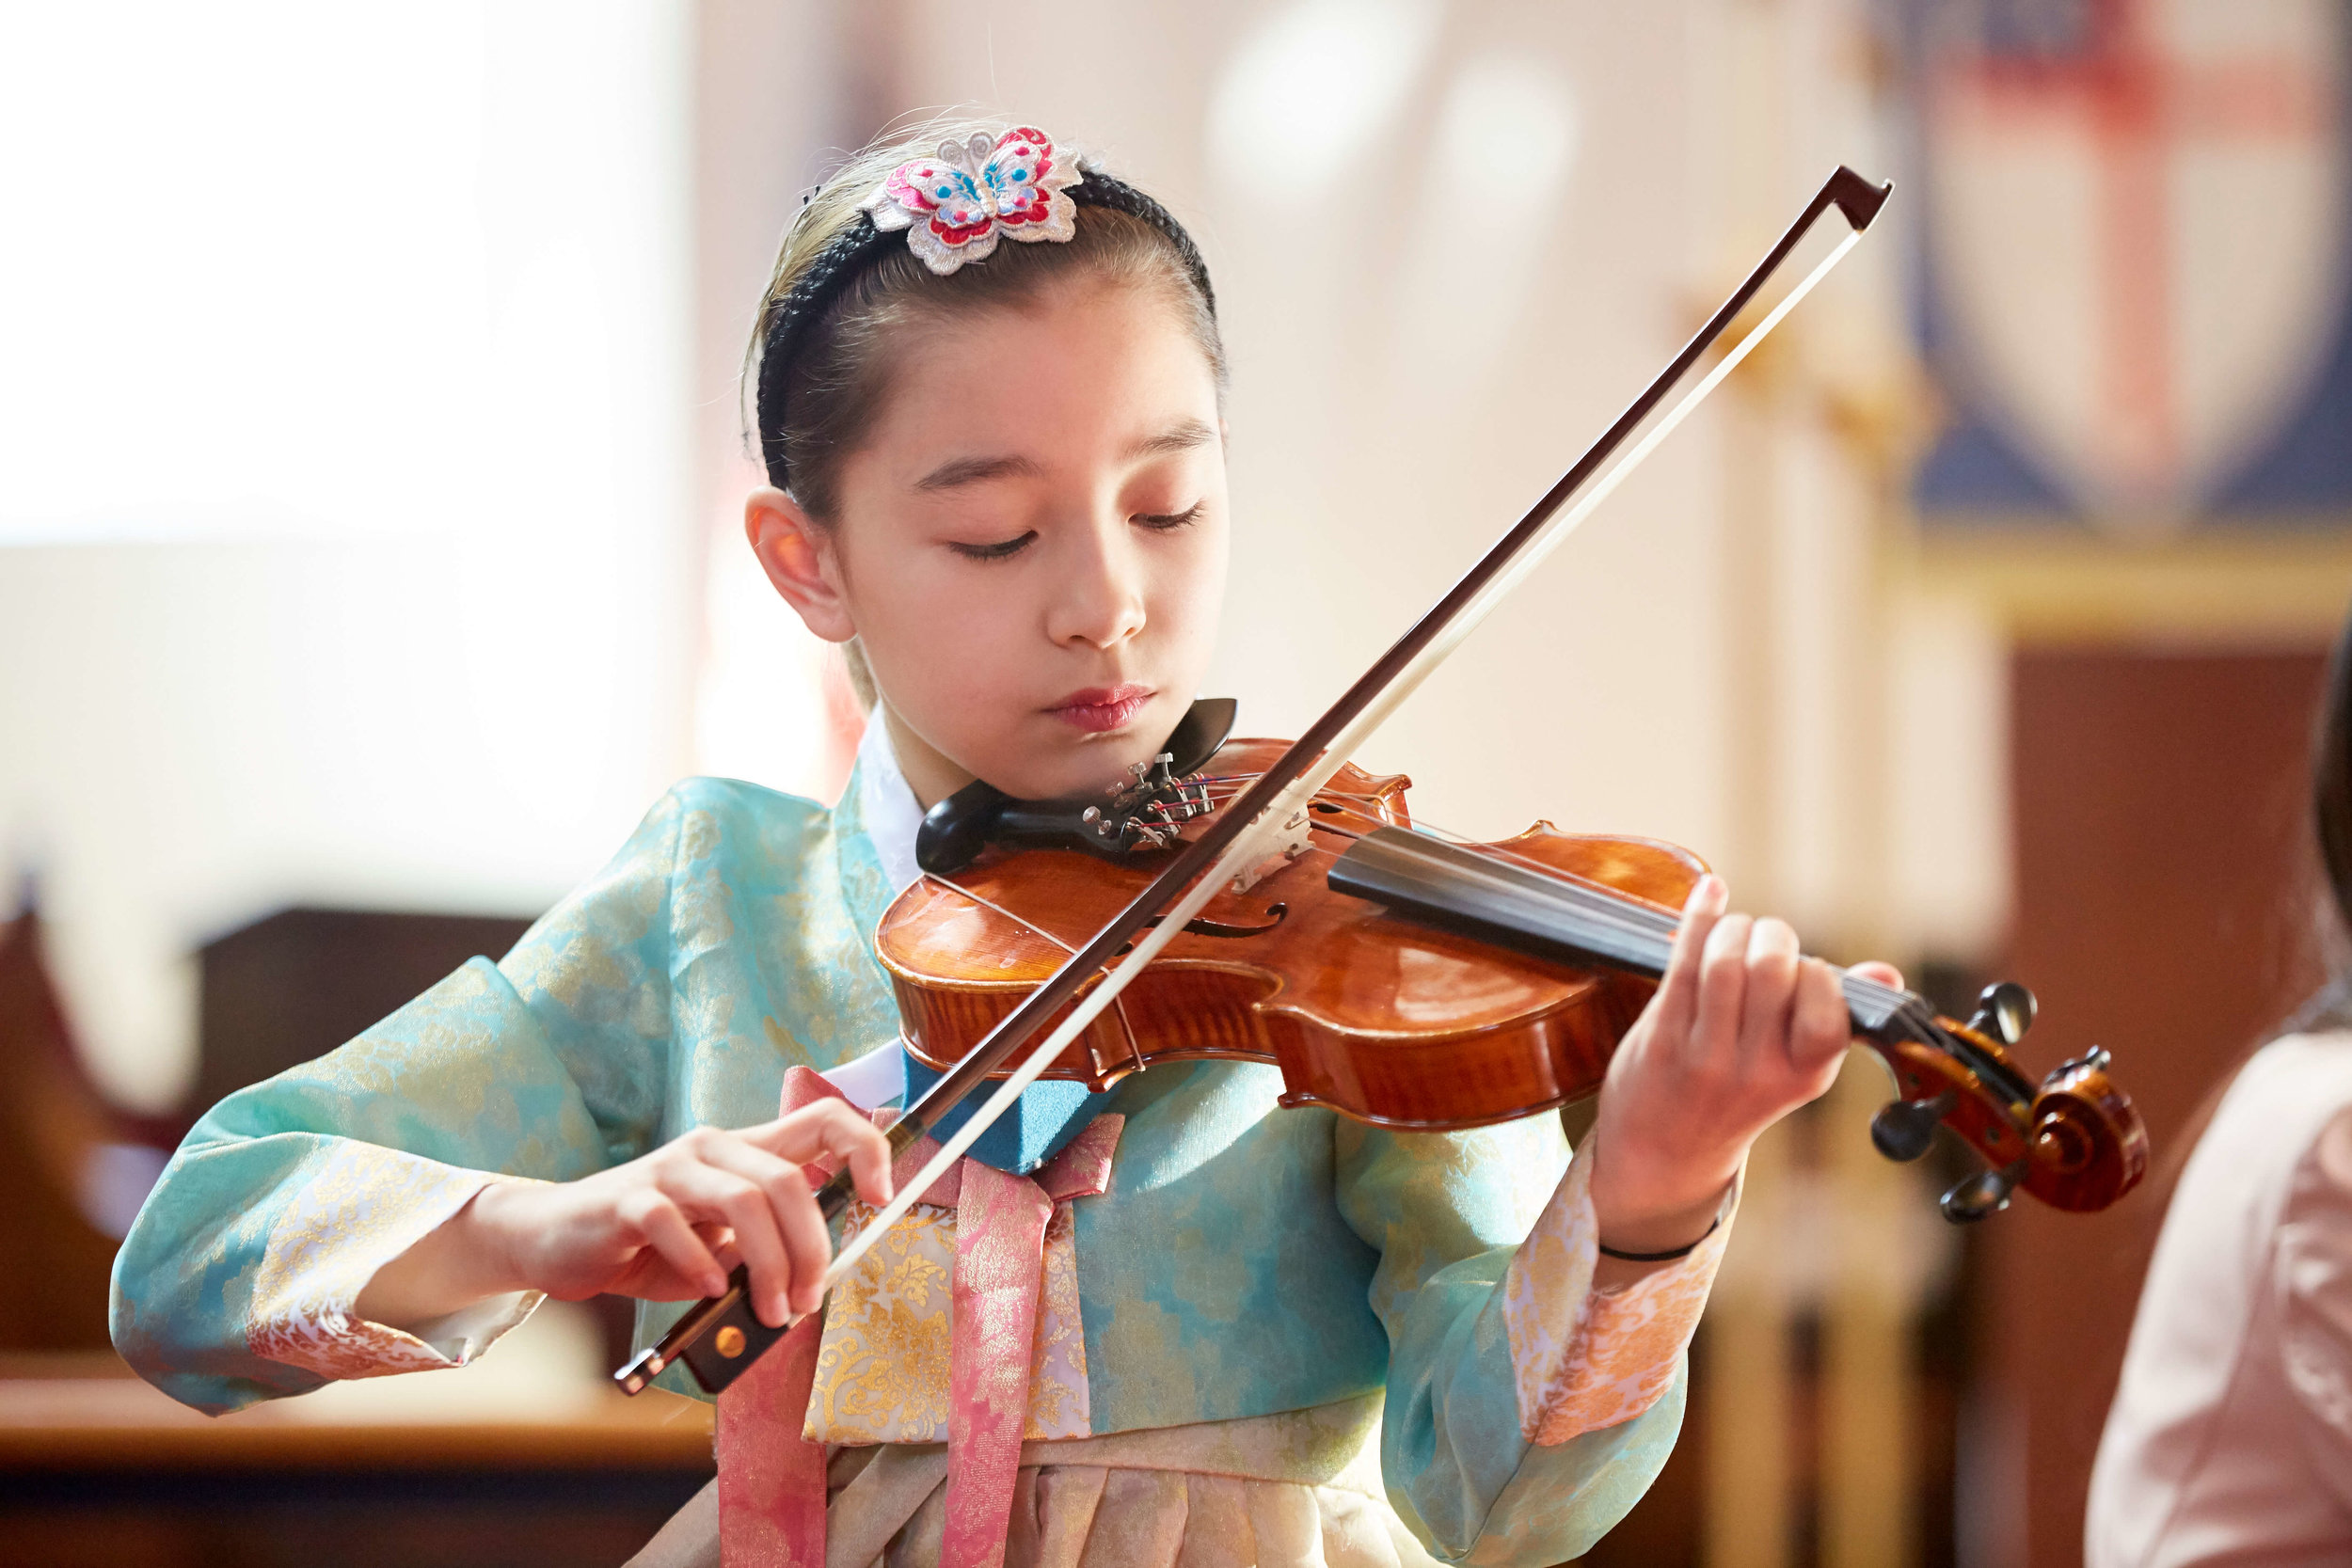   VIOLIN/CELLO LESSONS IN CINCINNATI   for beginner, intermediate, and advanced students of all ages  CALL  513-560-9175  TODAY TO SCHEDULE YOUR FIRST LESSON   Request Info  